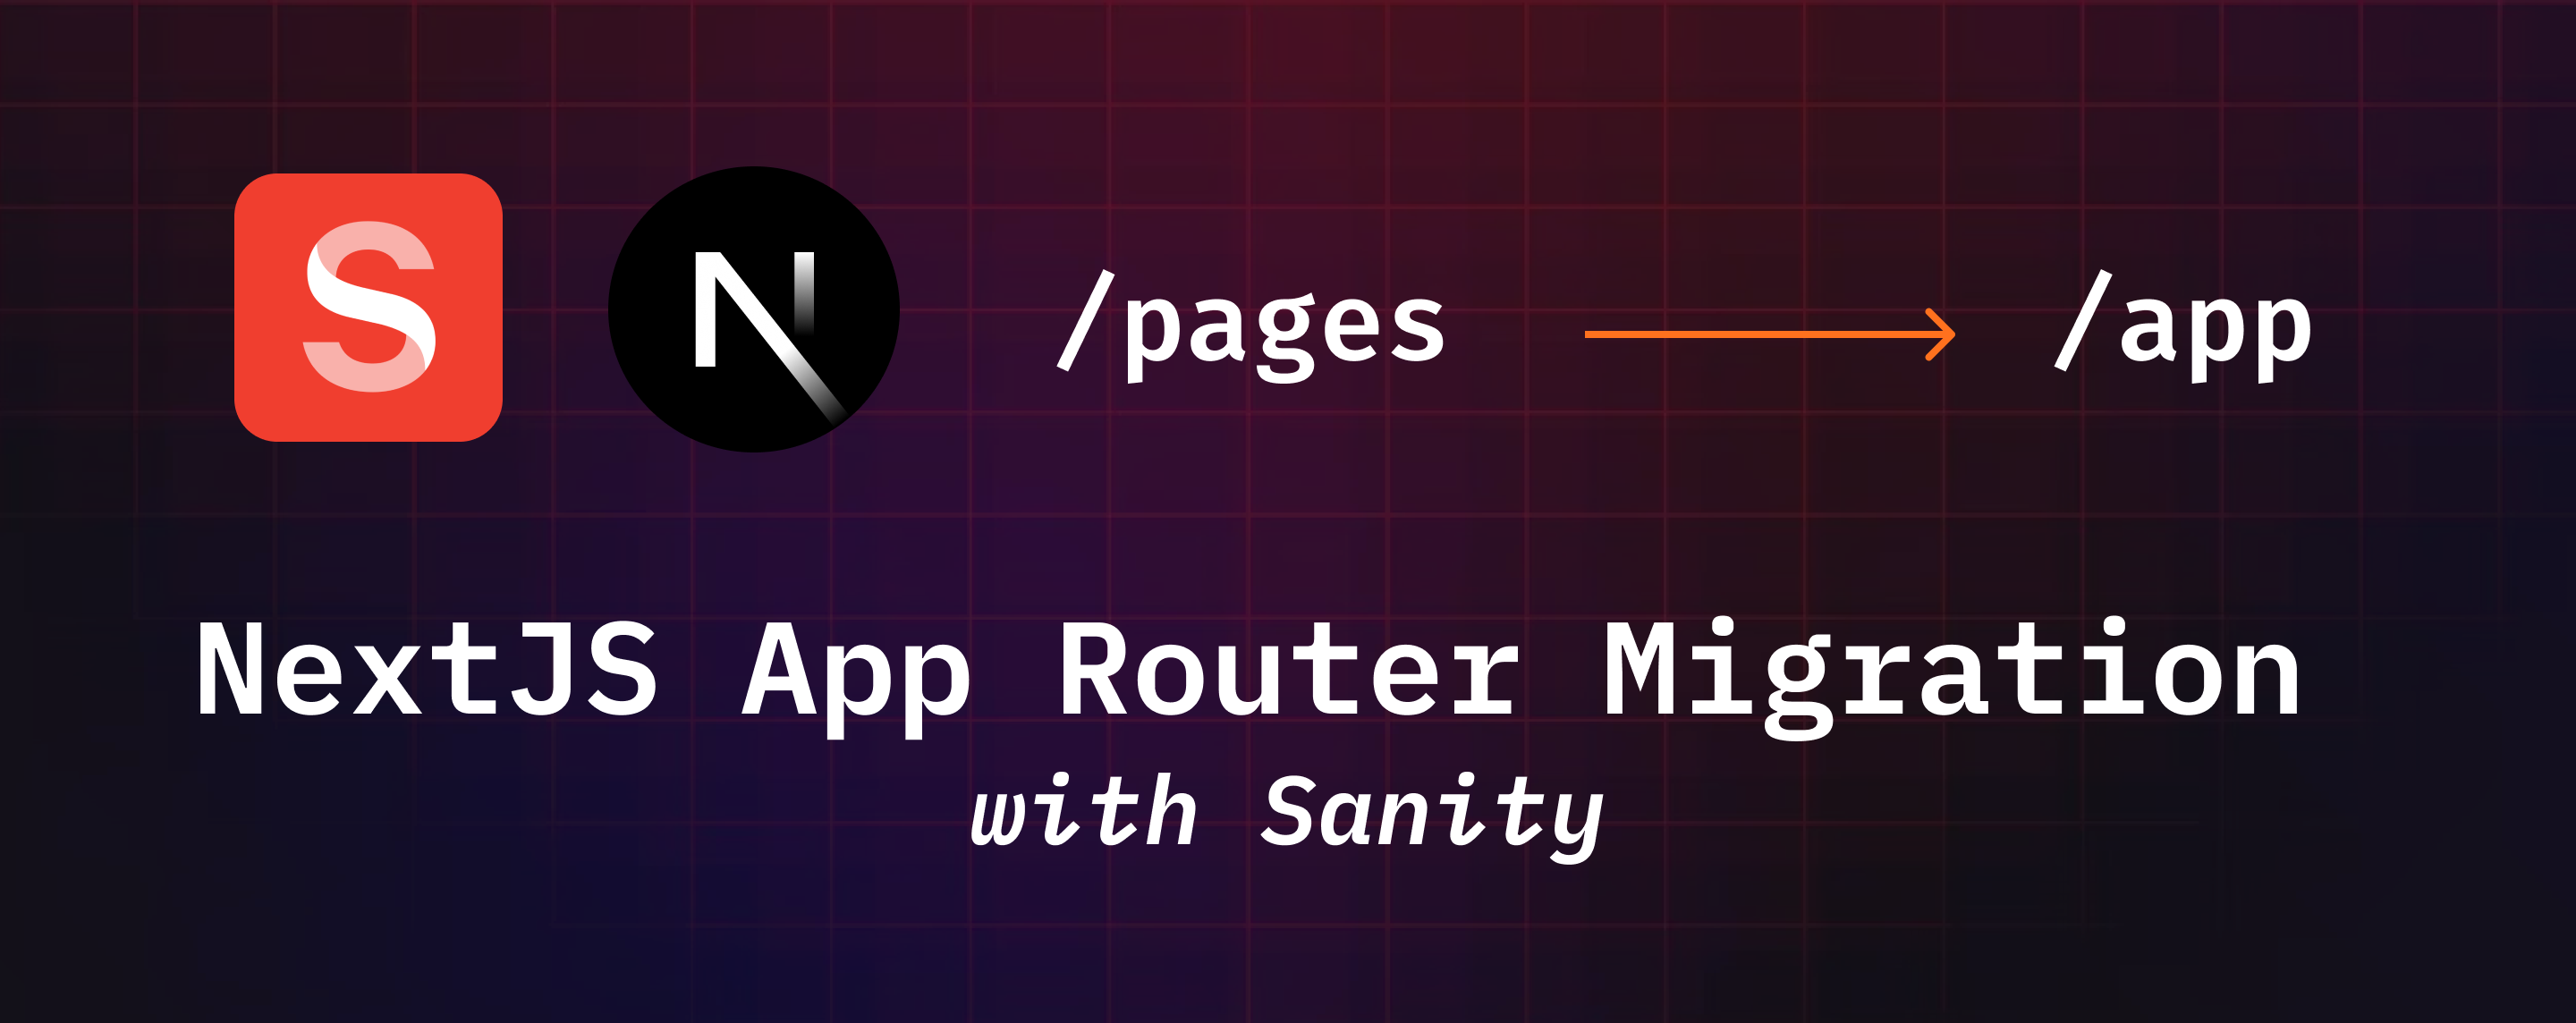 NextJS App Router Migration with Sanity Hero Image